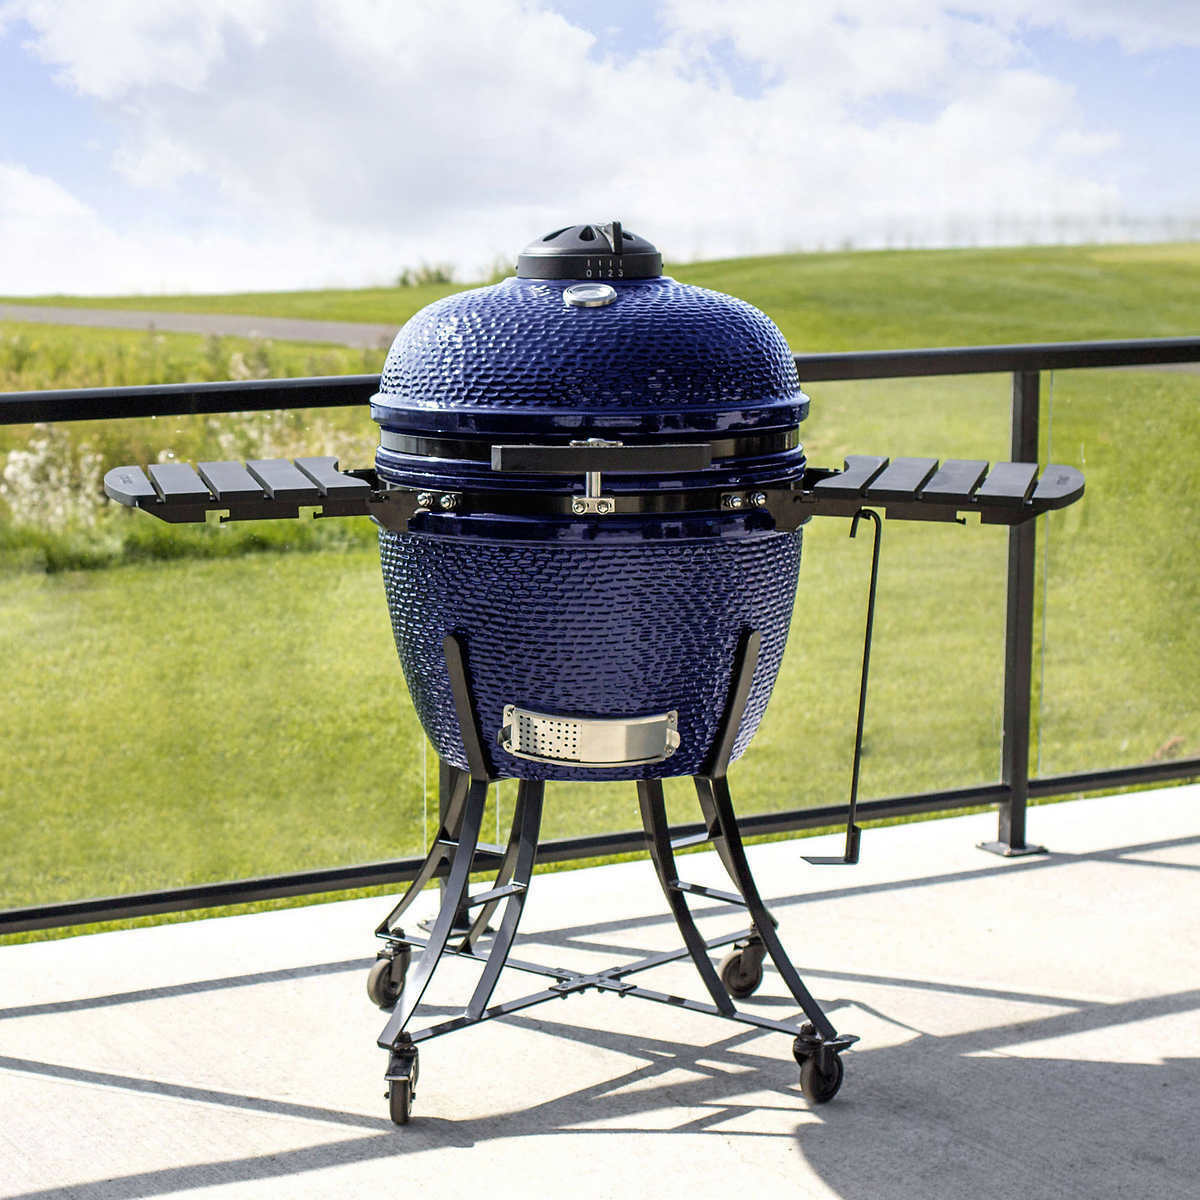 Lousiana Kamado 24 Grill Ymmv Costco In Store Only 499,Baby Back Ribs Temperature